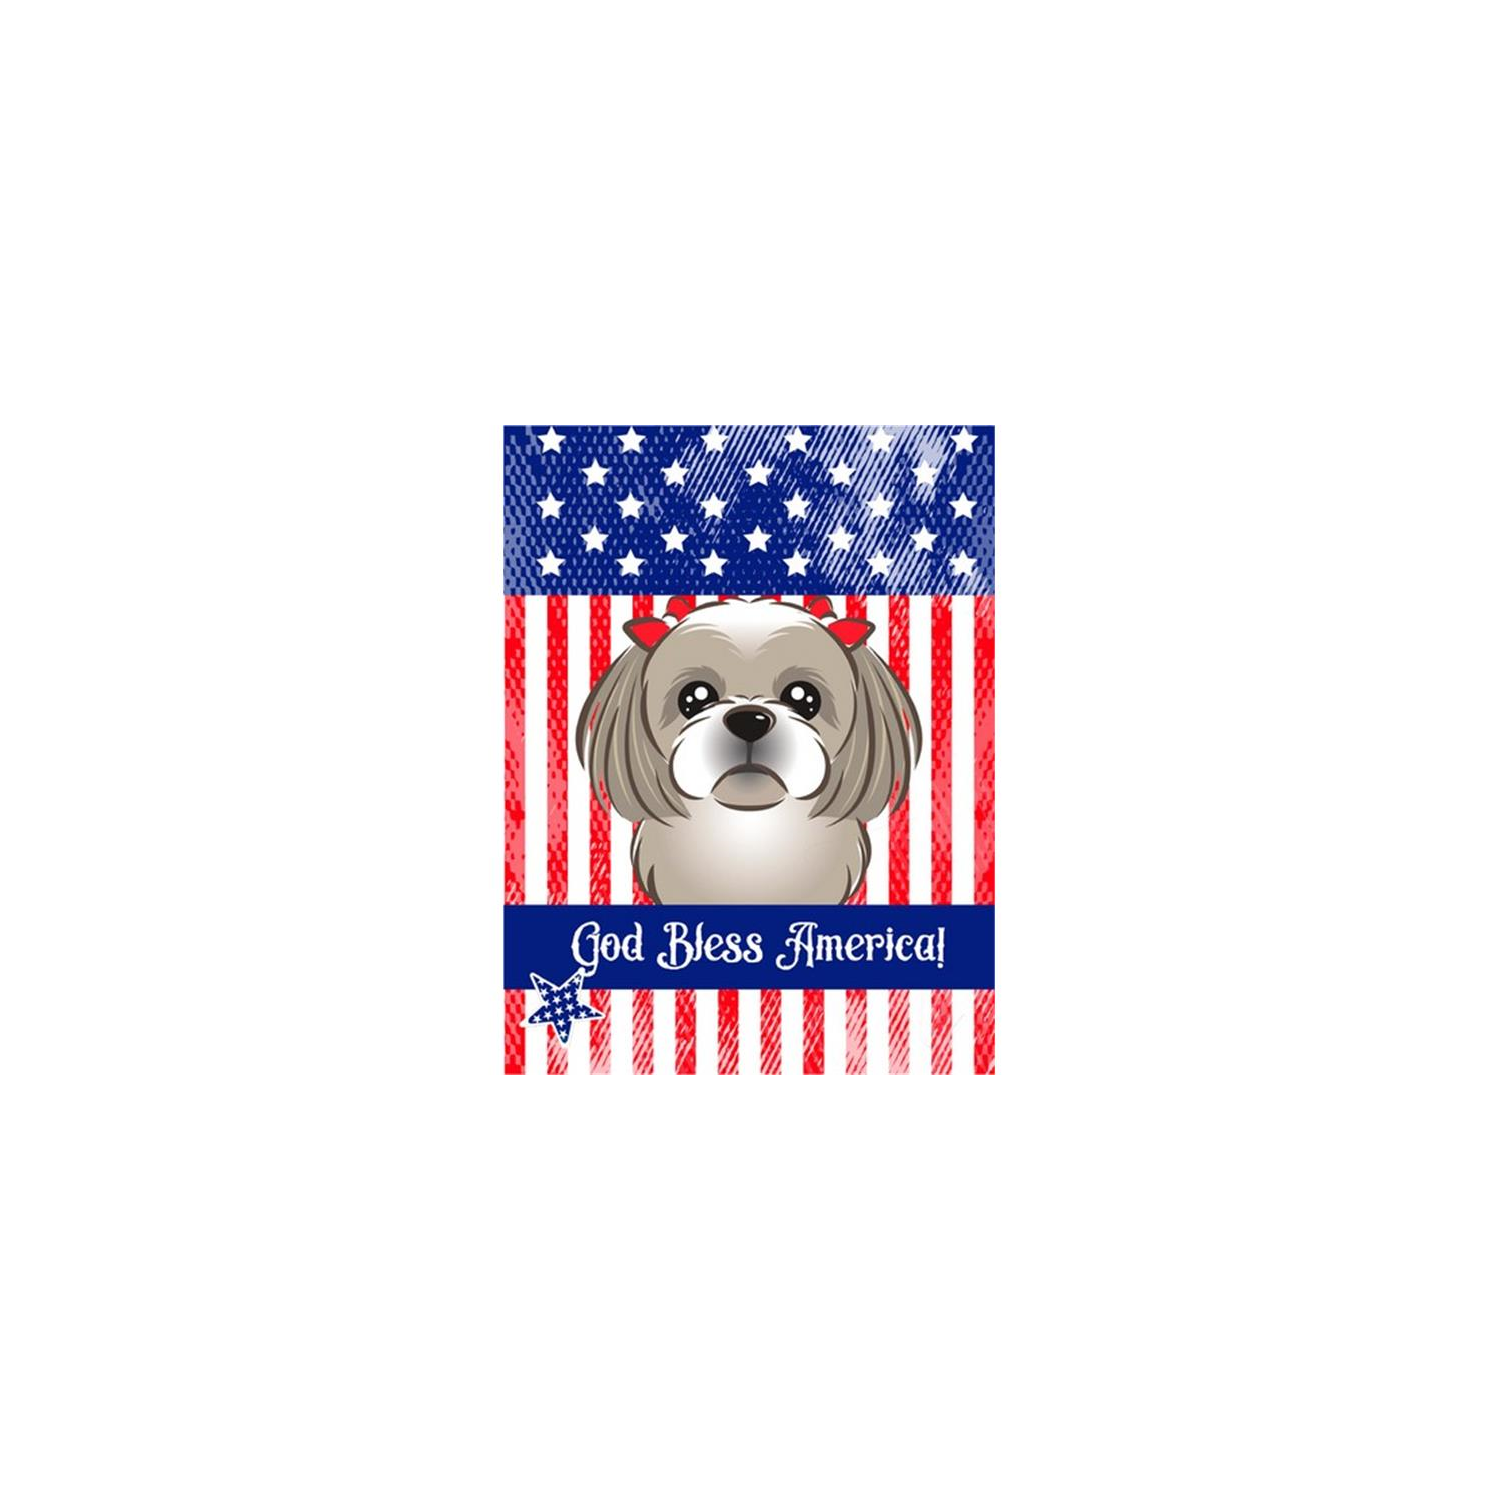 Carolines Treasures BB2180CHF God Bless American Flag with Gray Silver Shih Tzu Canvas House Flag